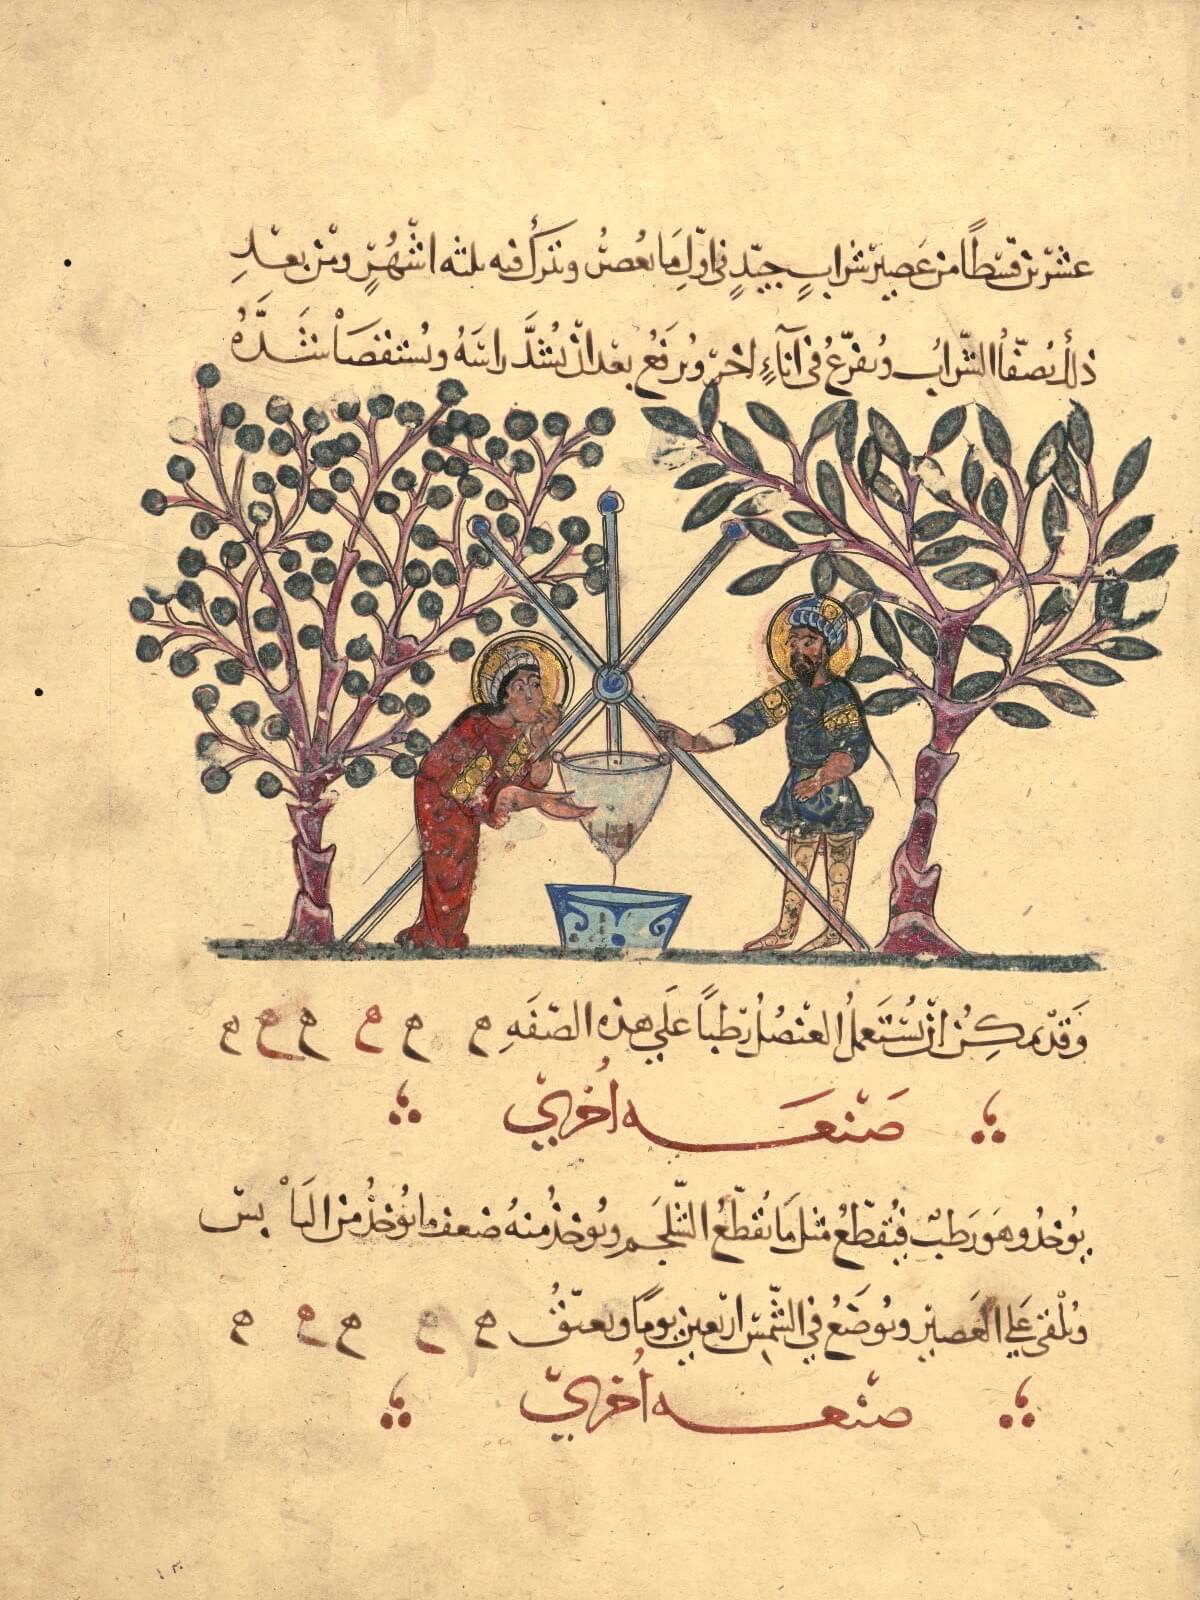 Single leaf from Arabic version of Dioscorides’ De materia medica, copied in 621 AH / 1224 CE in Baghdad and removed from original manuscript – Aya Sofya 3703 – likely late 19th or early 20th century Ce. Walters Art Museum. Approximately 30 illustrations were removed from this manuscript that are now in public and private collections.